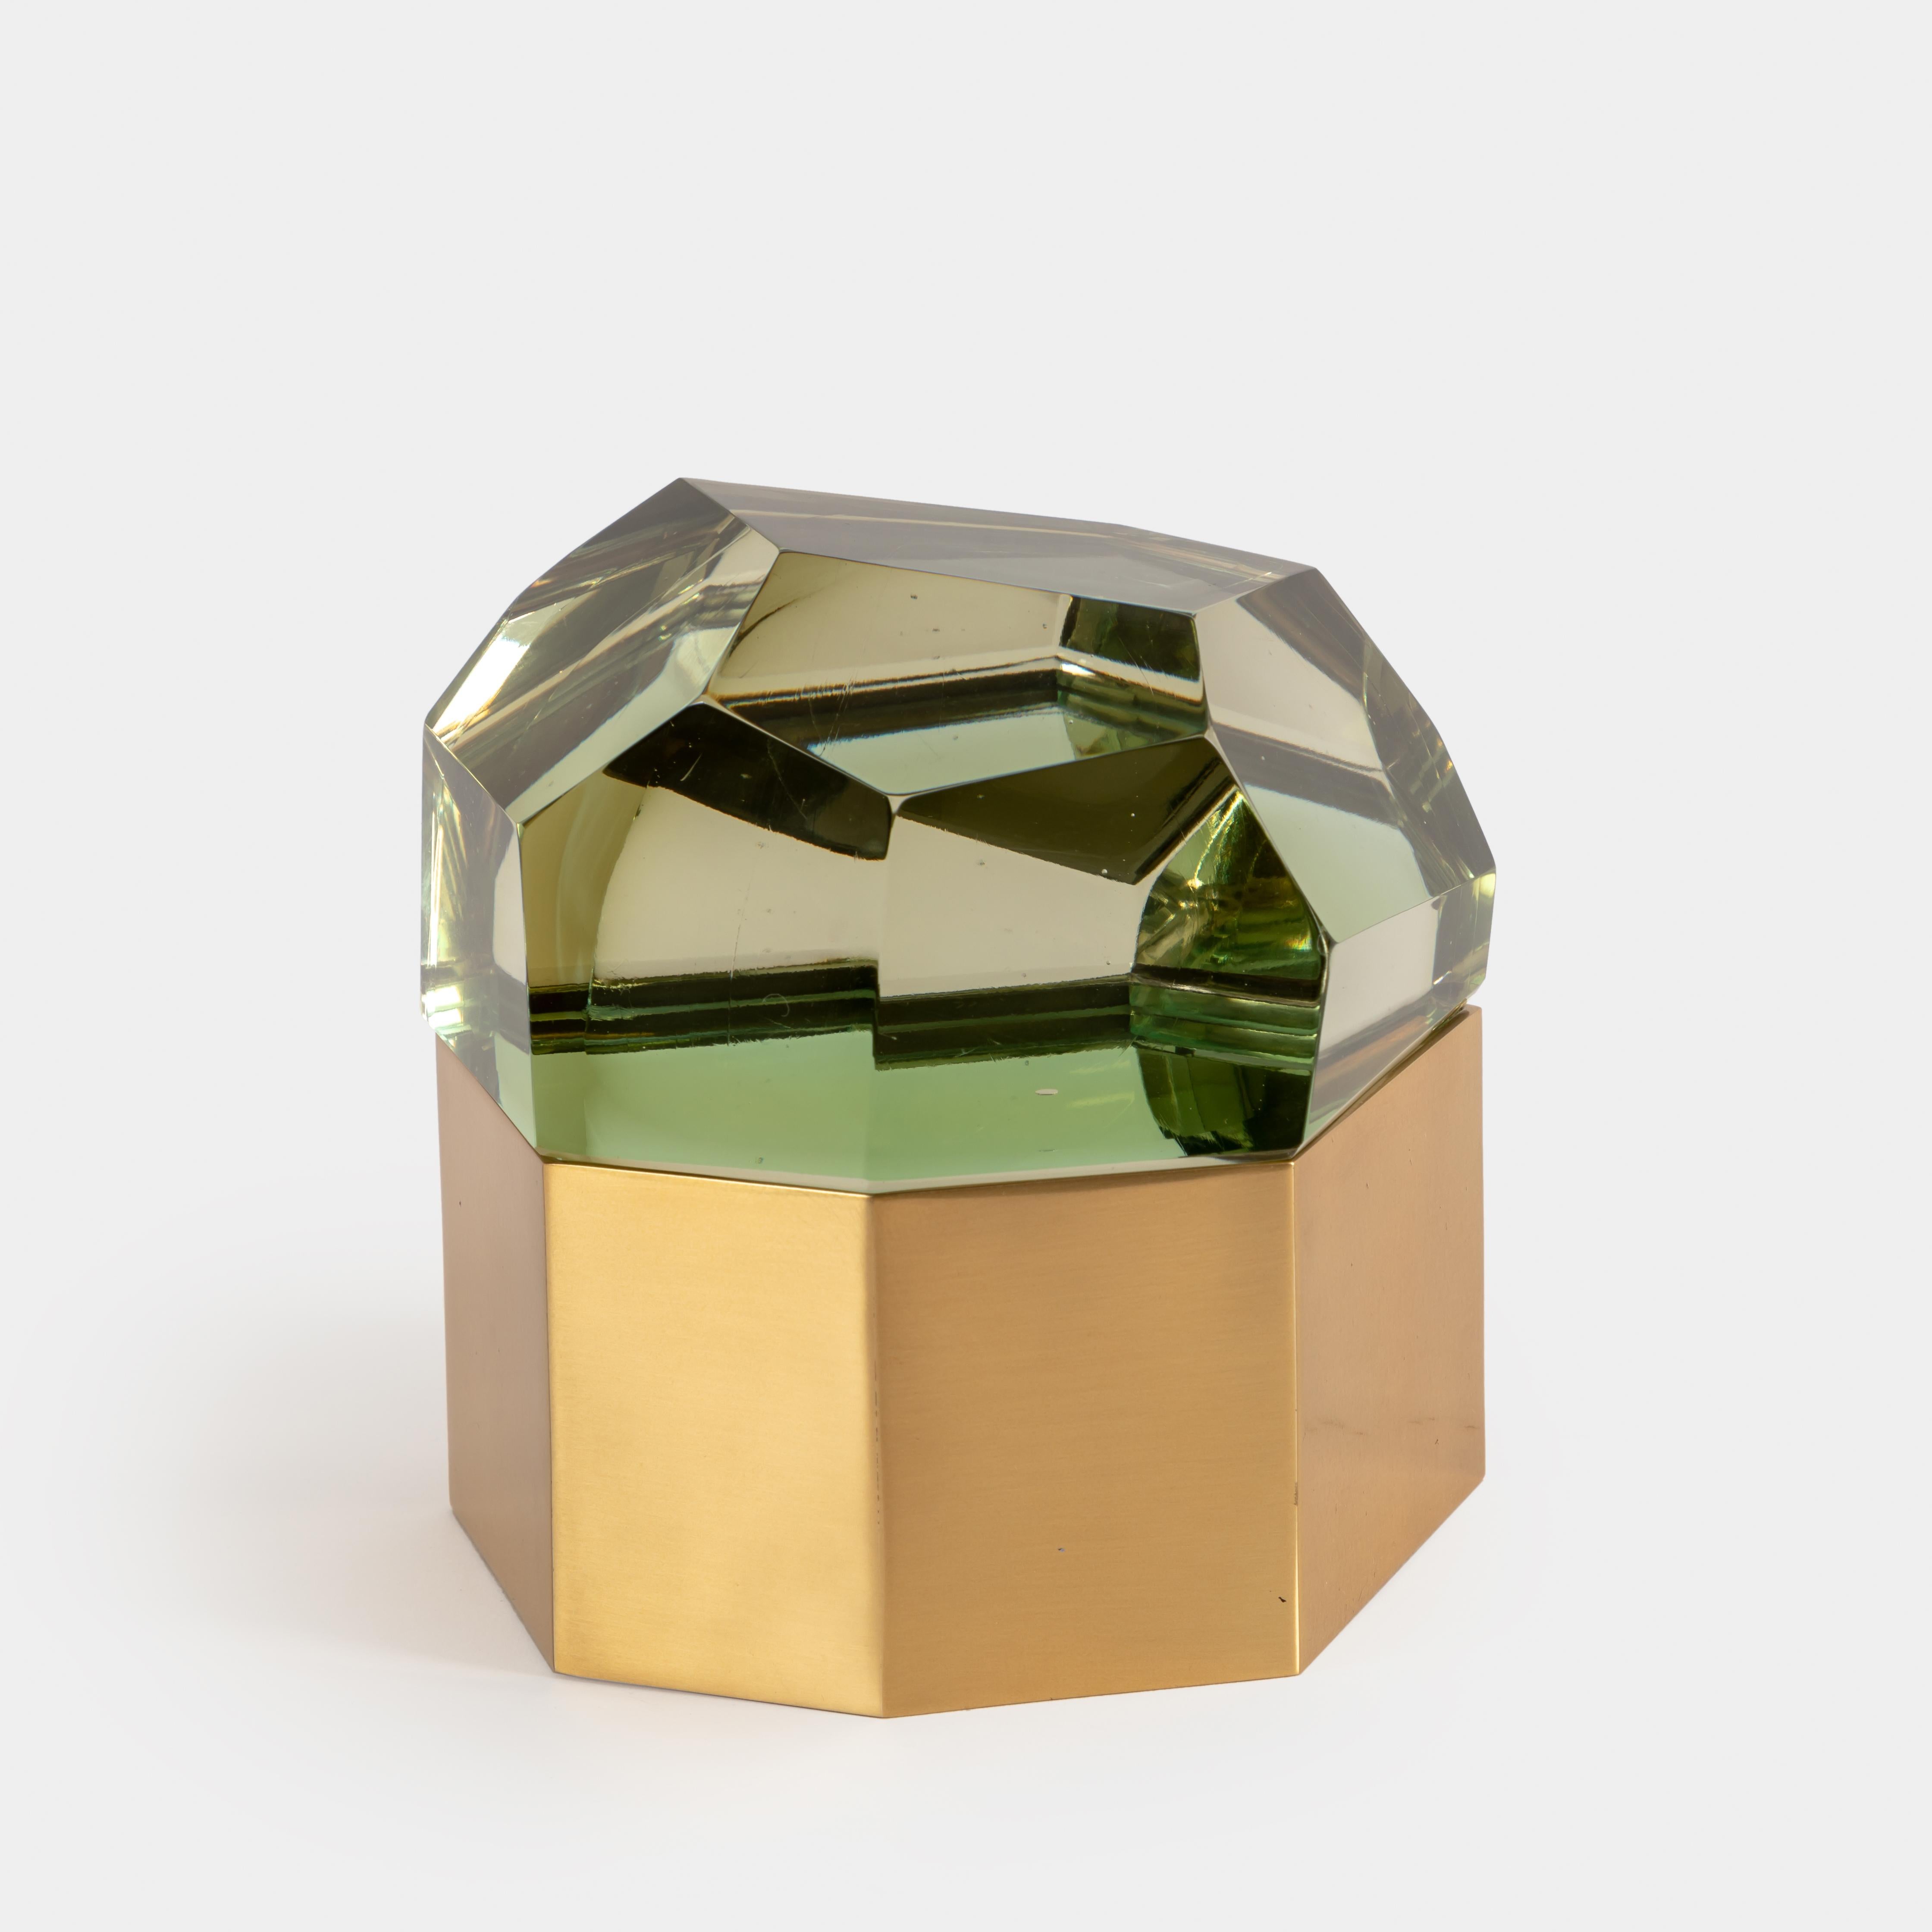 Roberto Giulio Rida exquisite chartreuse 'Diamante Murano' glass box with thick glass ground and polished to create faceted fitted top with gilt brass base covered inside with steel, Italy, 2017.  The glass is made of crystal glass core, then